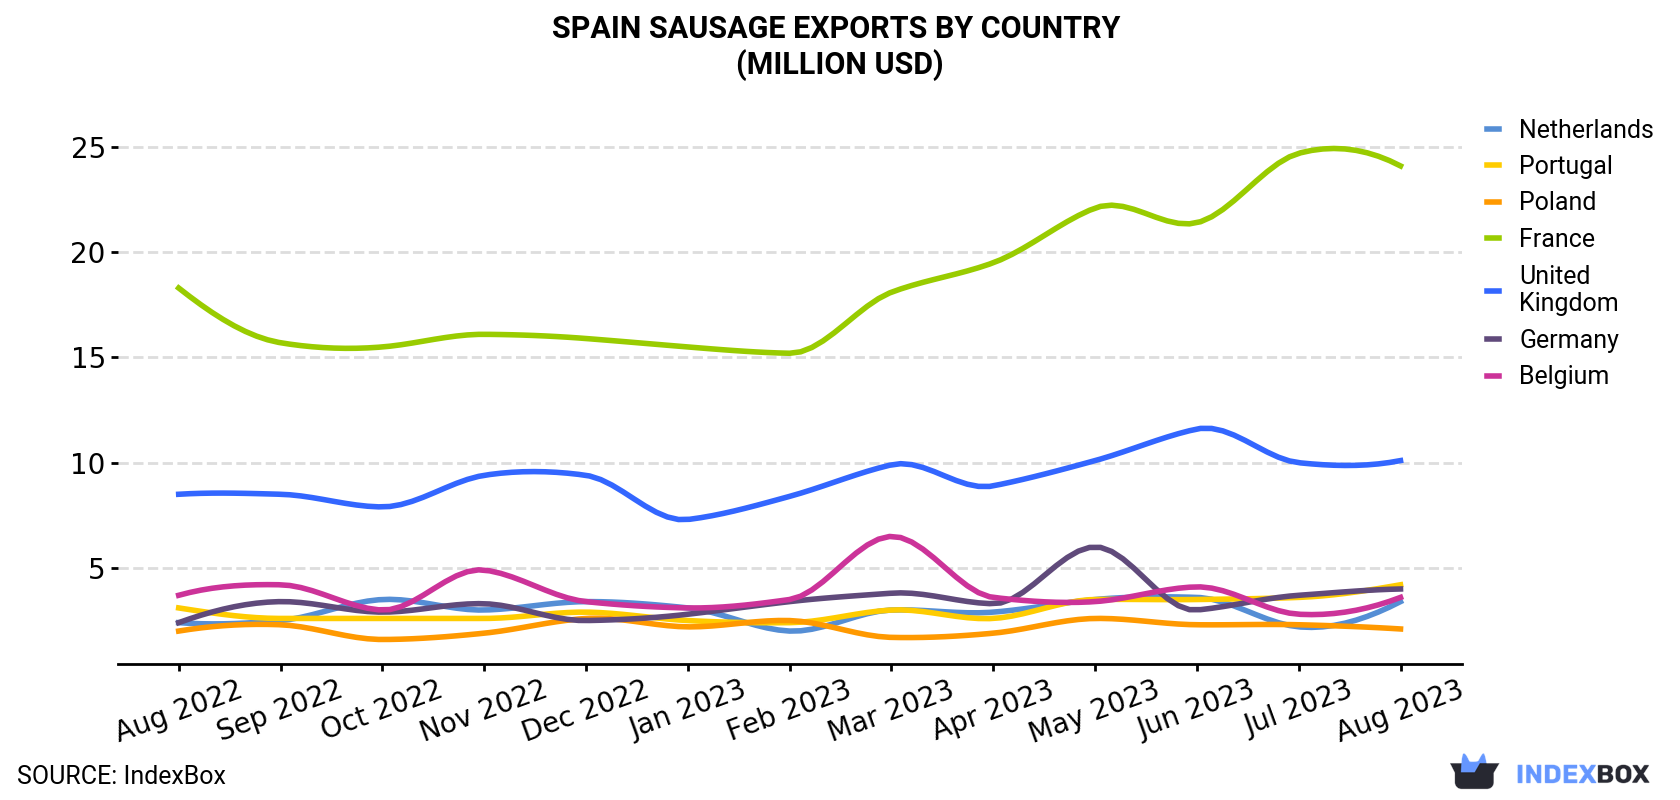 Spain Sausage Exports By Country (Million USD)